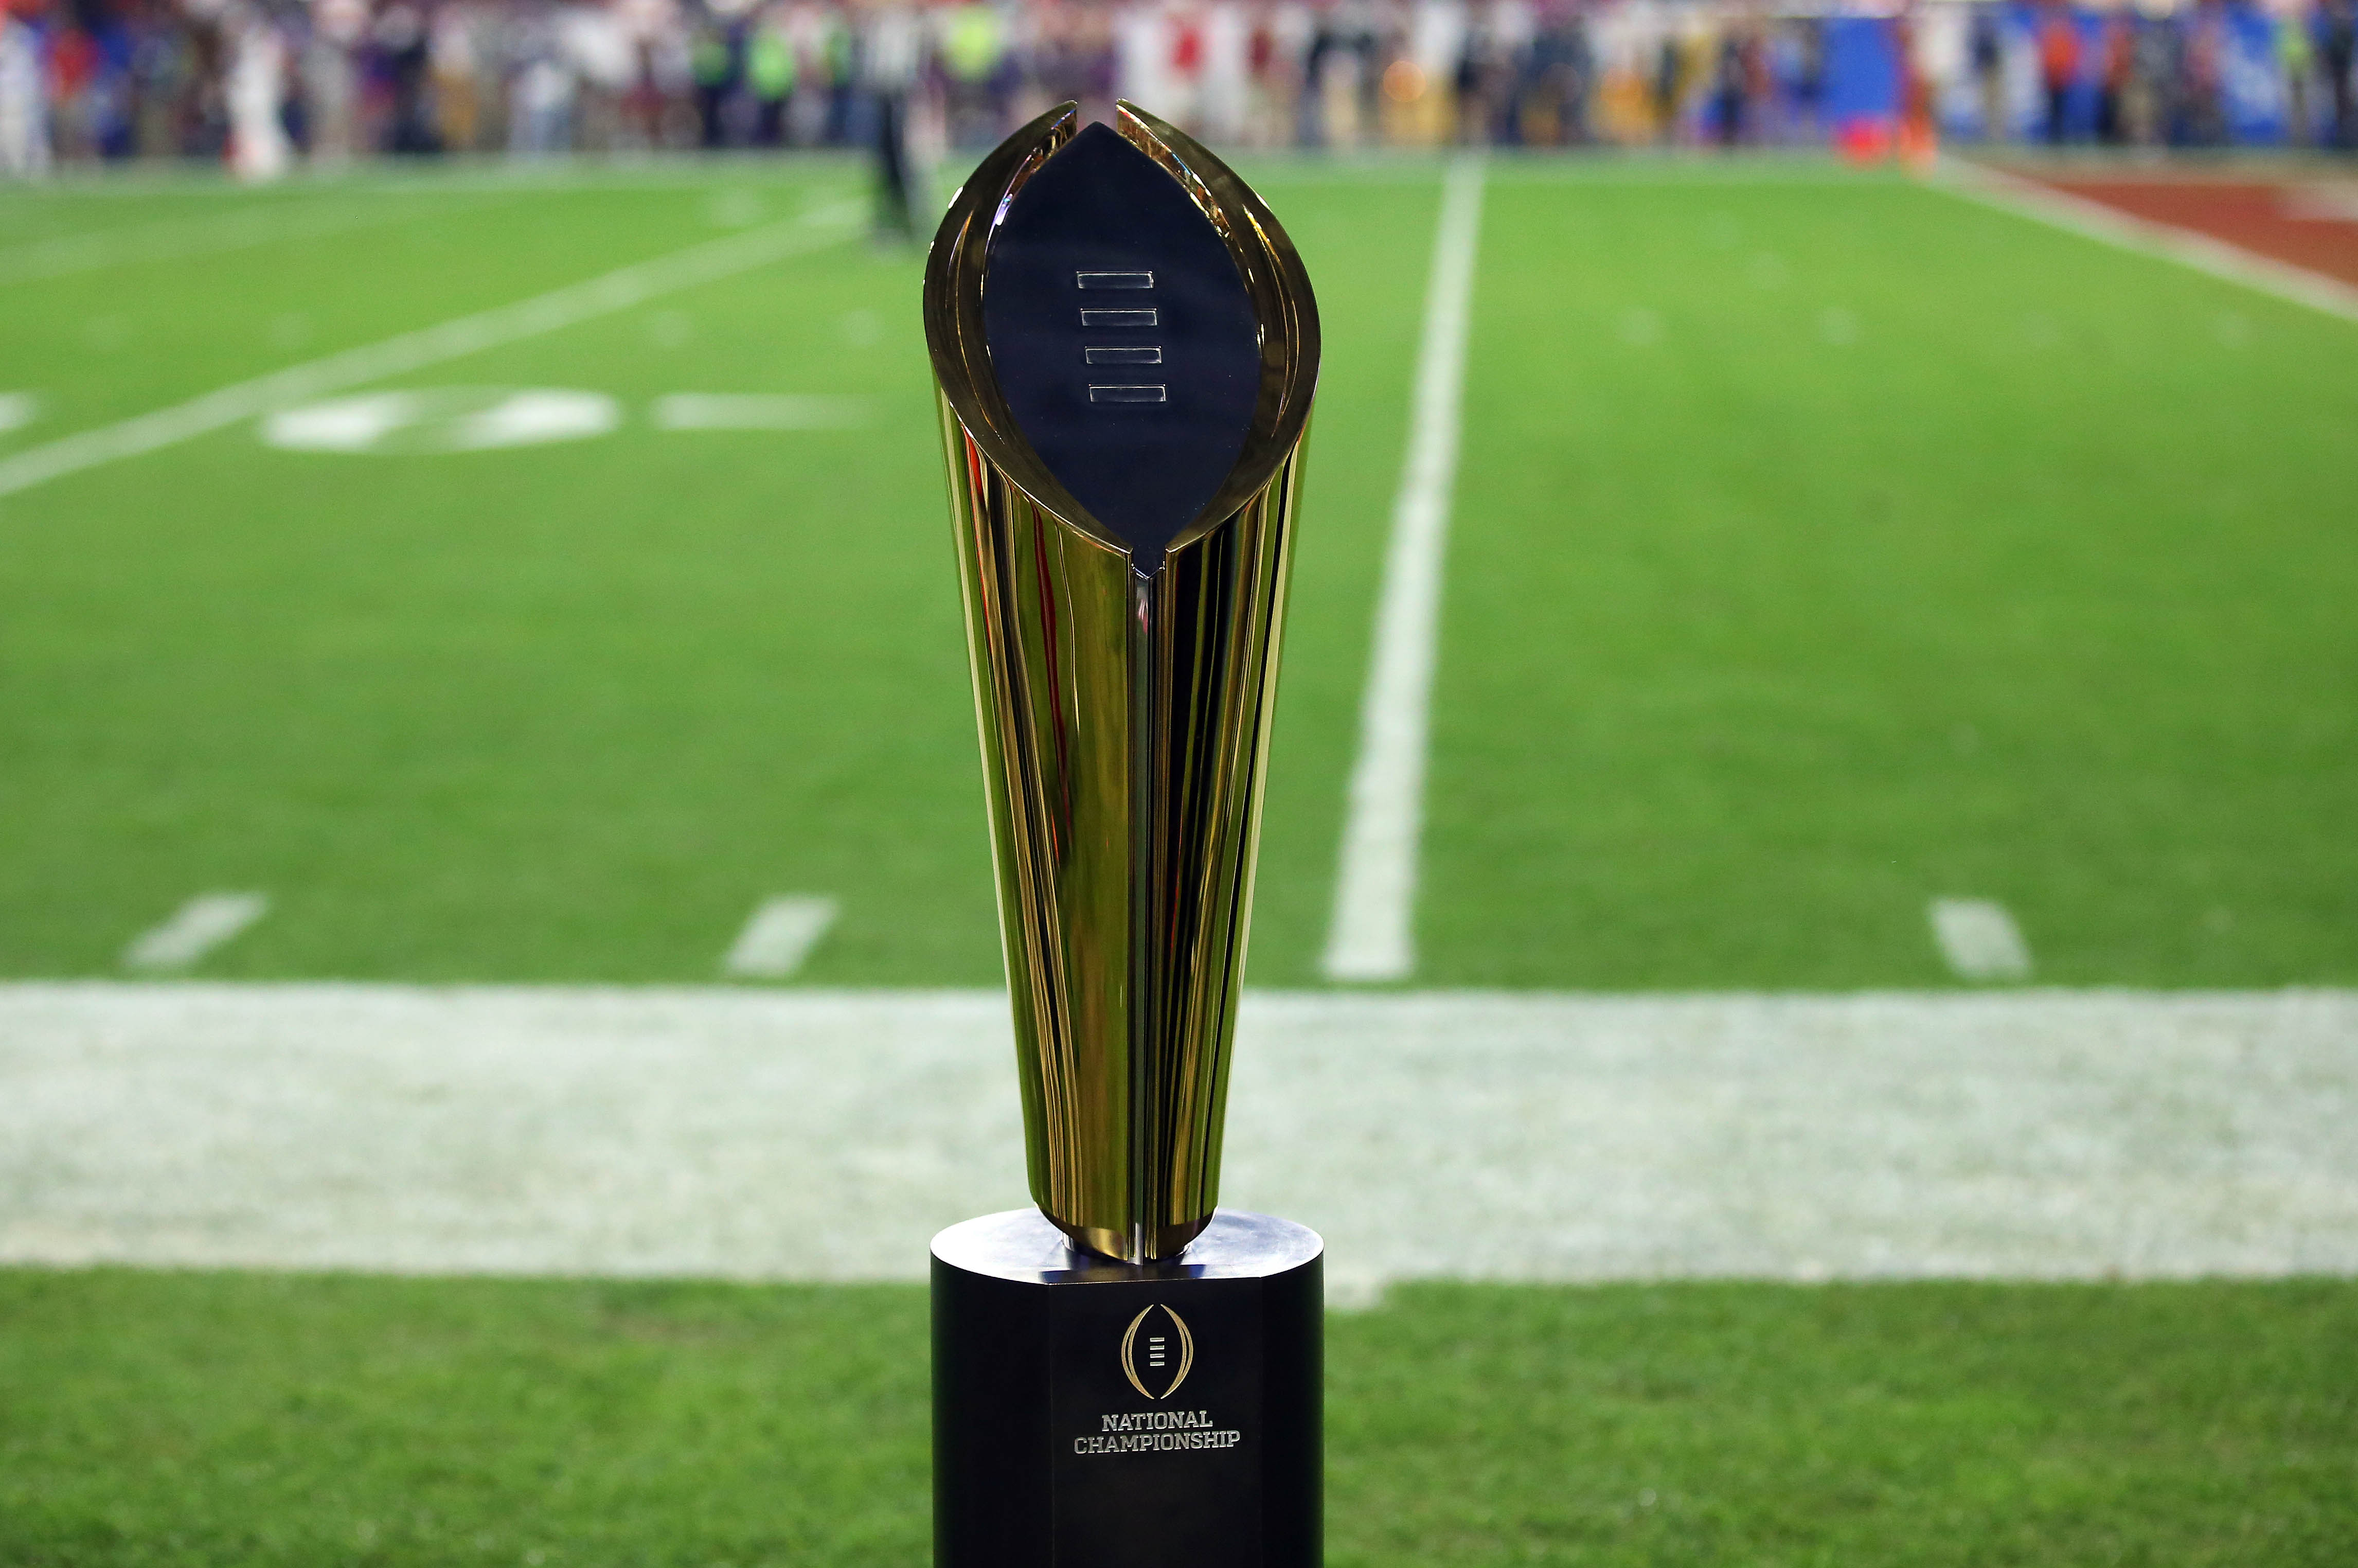 The 5 best college football bowl game gifts, ranked